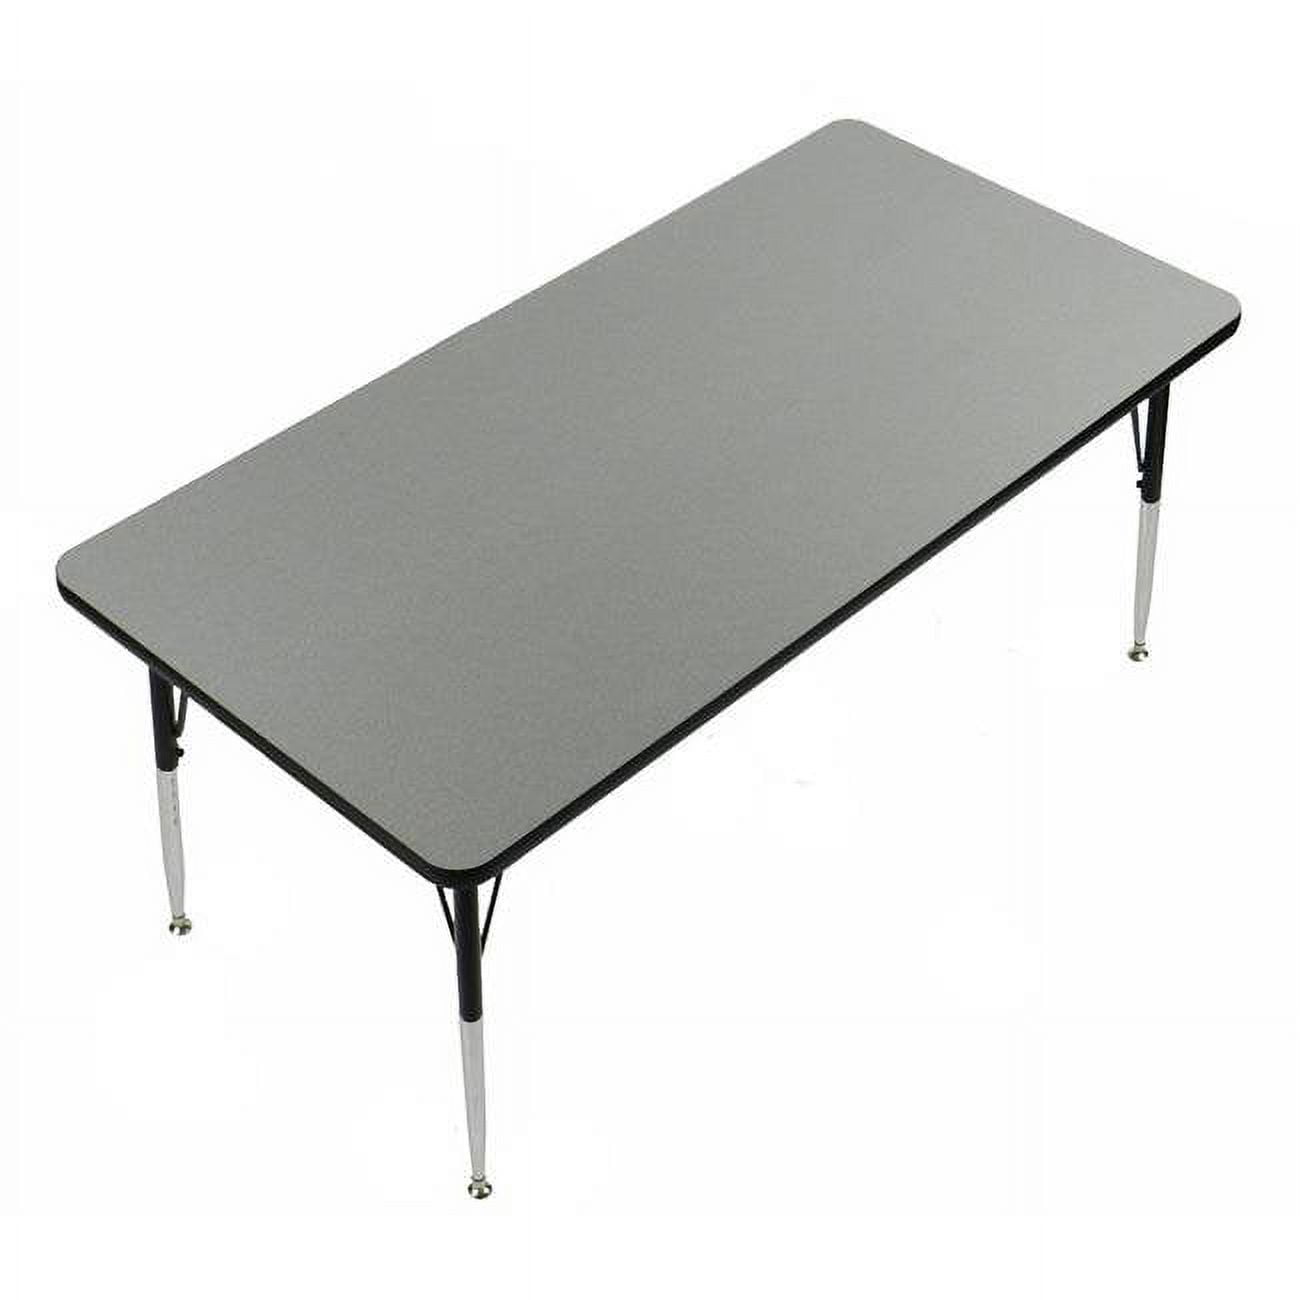 A6066-hor-55 1.25 In. High Pressure Top Horseshoe Activity Tables, Montana Granite - 60 X 66 In.